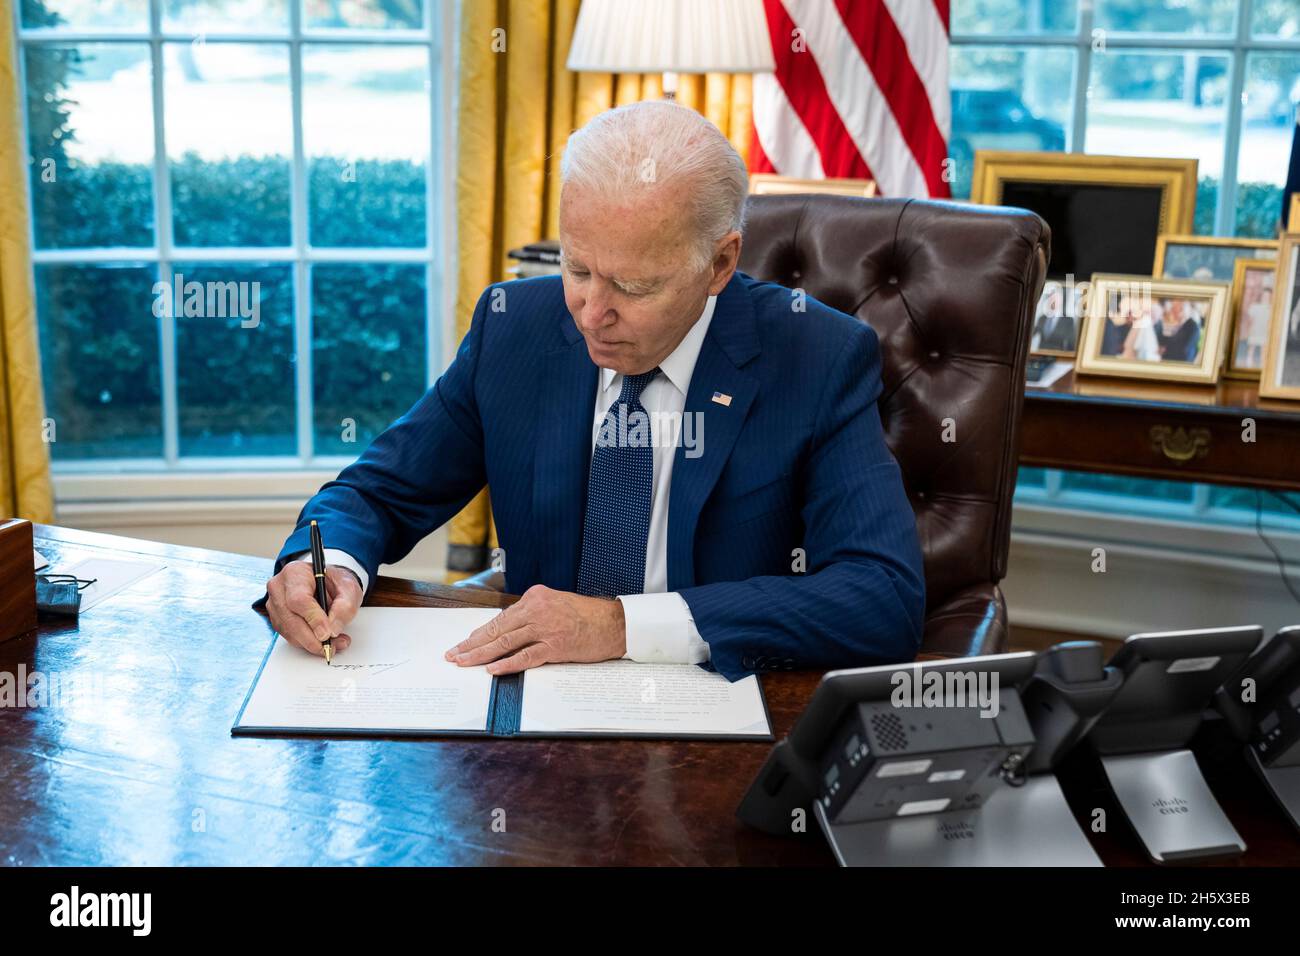 Washington, United States. 26 August, 2021. U.S. President Joe Biden signs the Women’s Equality Day Proclamation, in the Oval Office of the White House August 26, 2021 in Washington, D.C. Credit: Adam Schultz/White House Photo/Alamy Live News Stock Photo